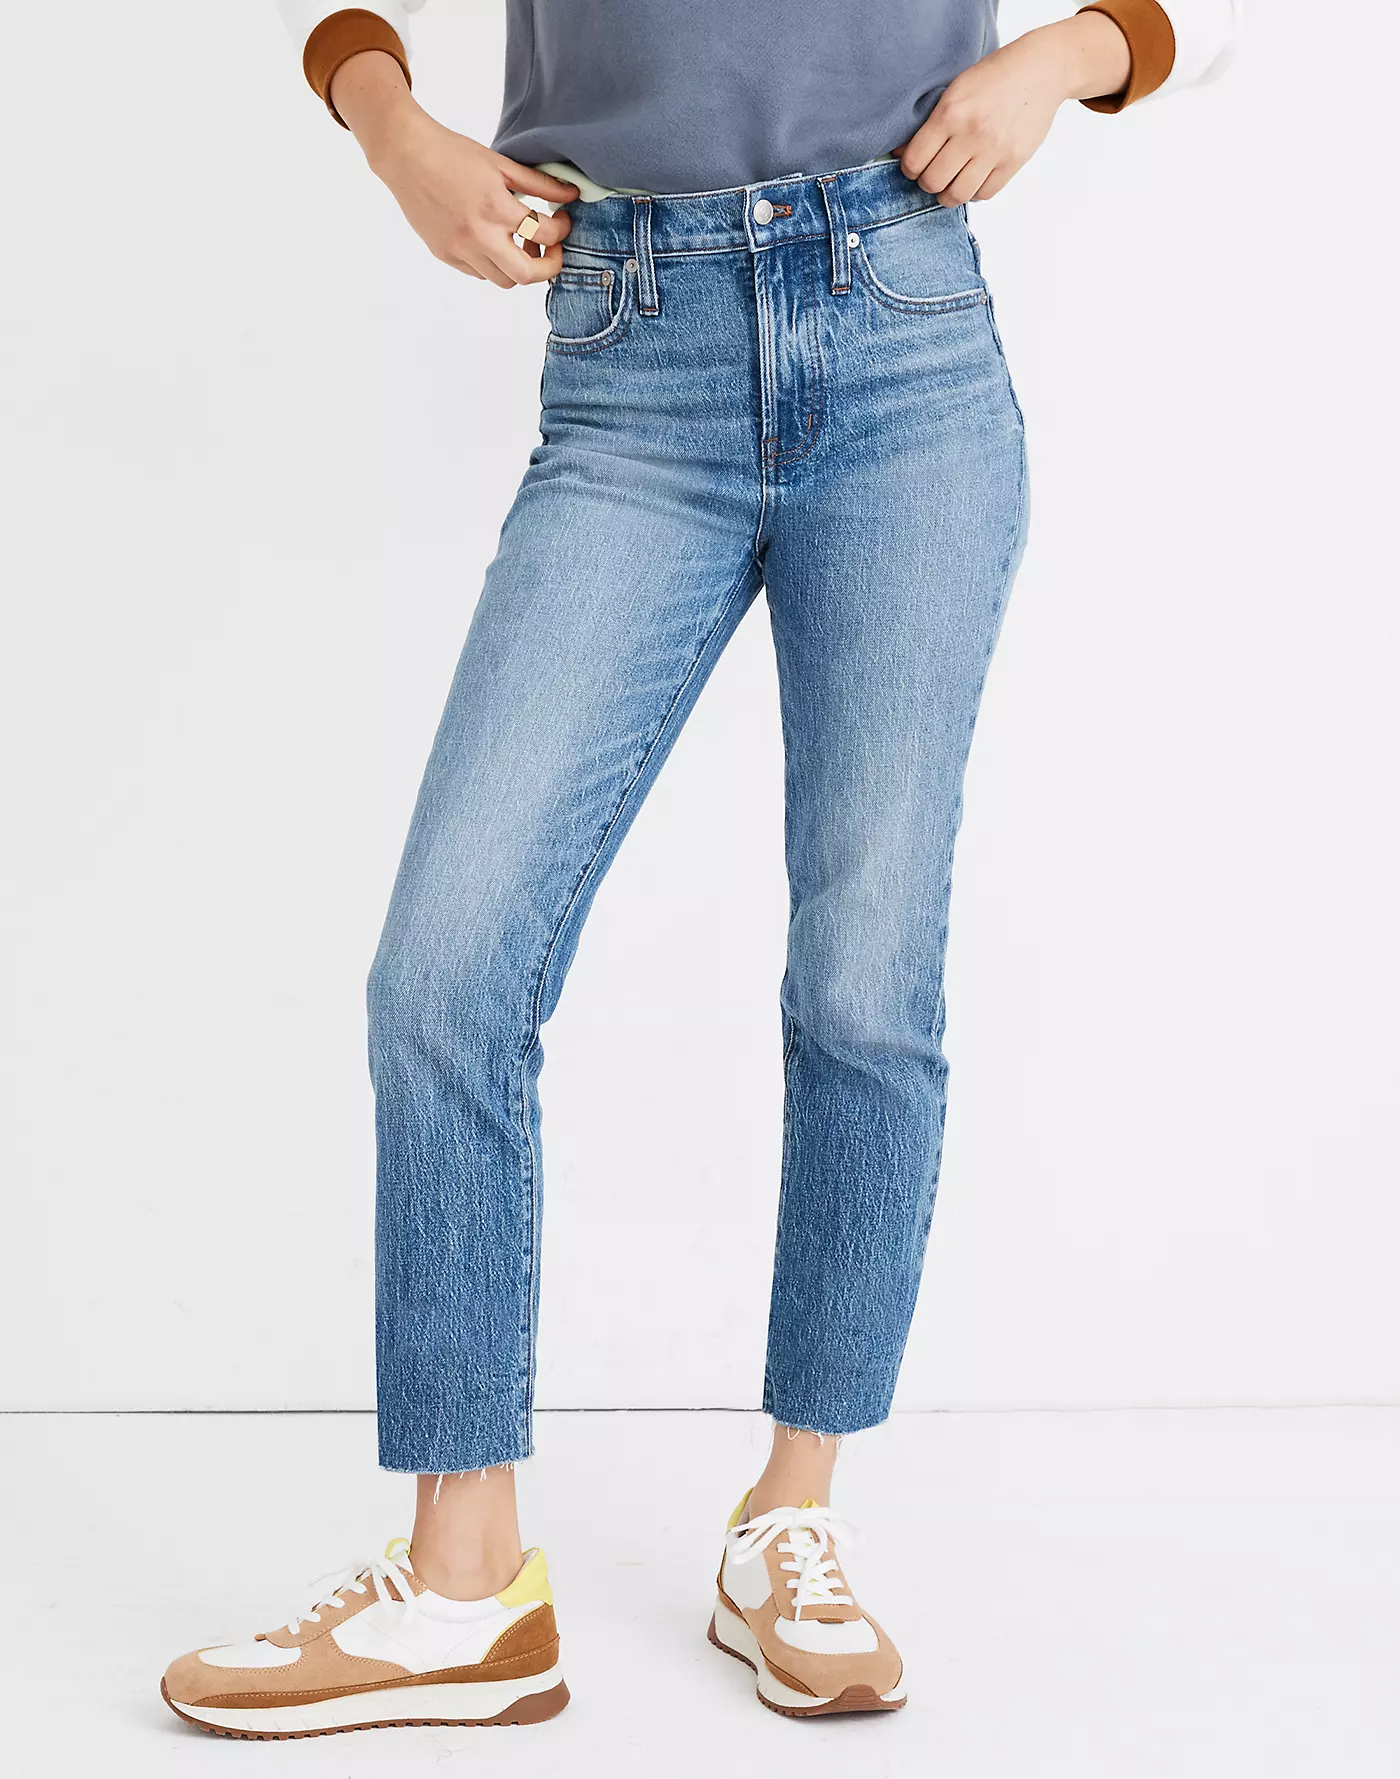 Madewell + The Perfect Vintage-Style Jean (Code: STOCKUP)